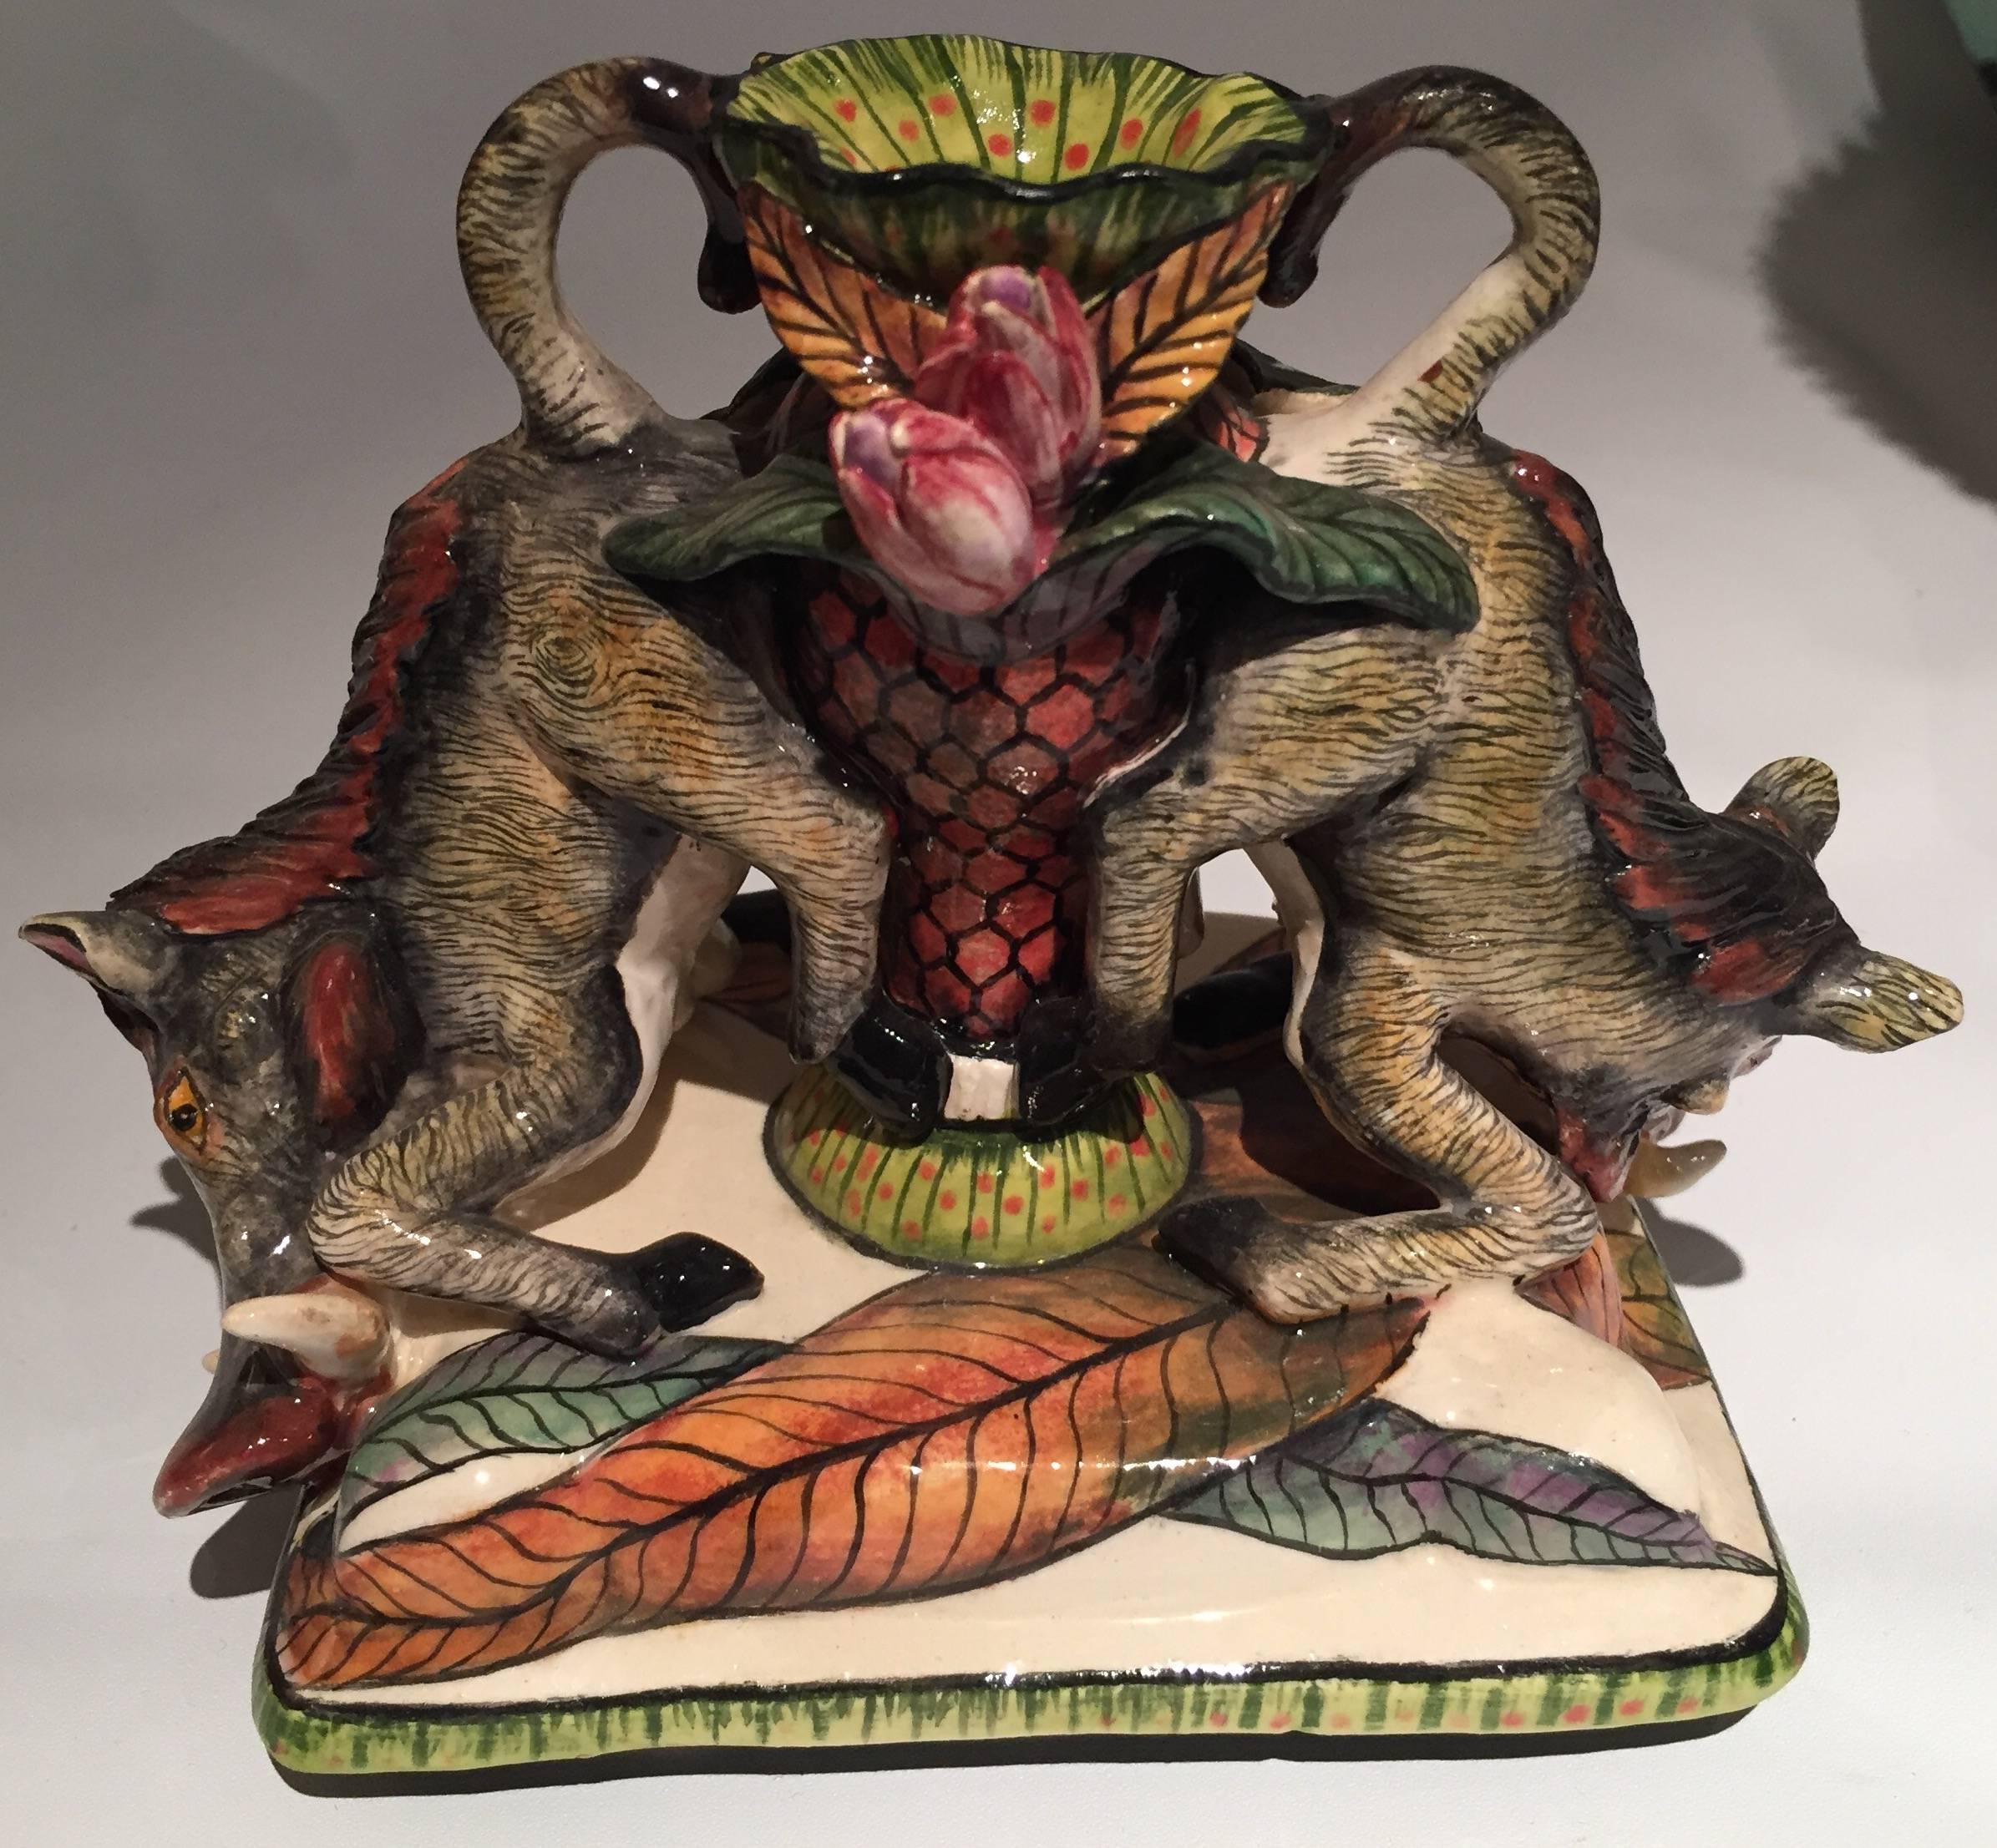 Warthog Tureen Centrepiece Ceramic Sculpture from Ardmore, South Africa 1